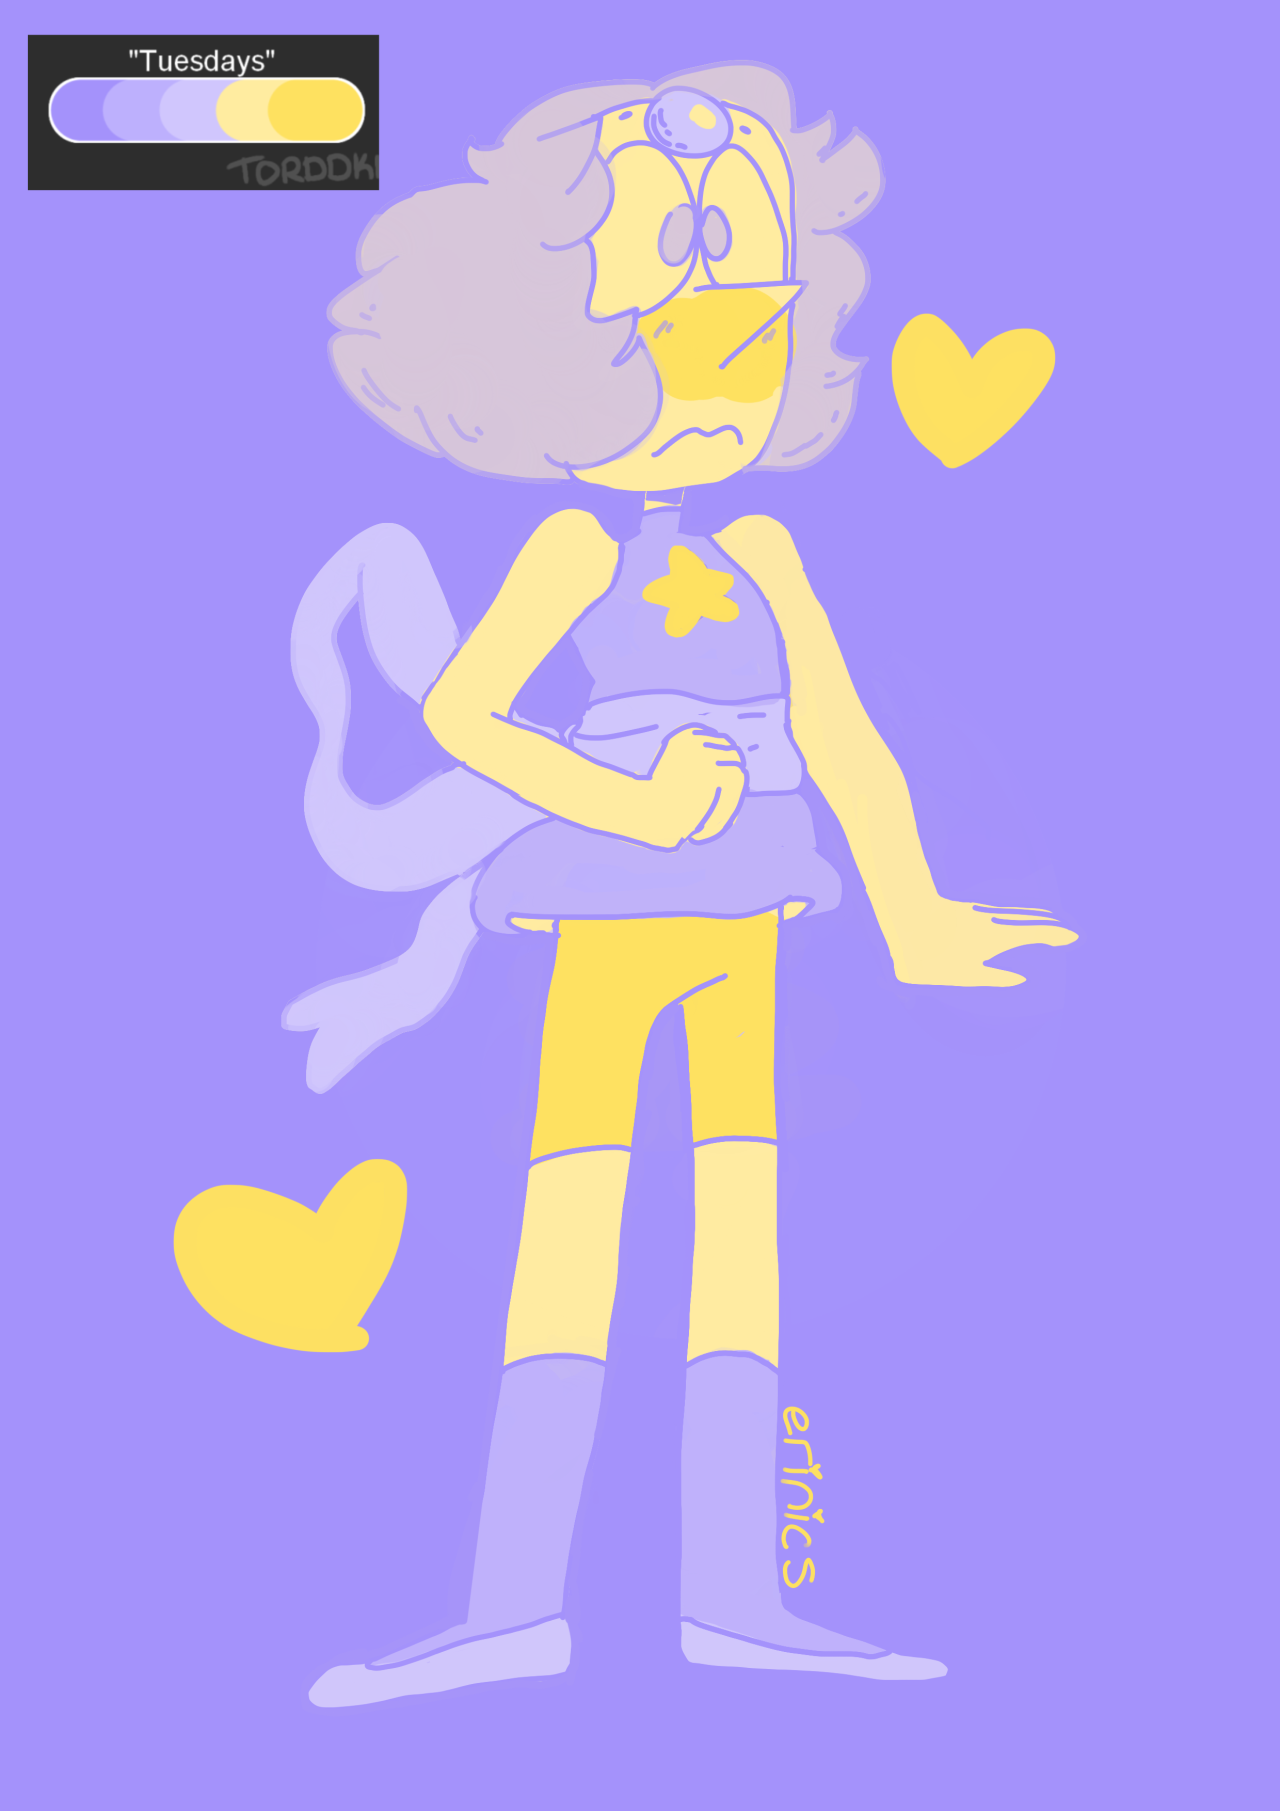 lmaoisreallyfunny said: Can you do Pearl in the "Tuesdays" color pallet....PS I love your art Answer: